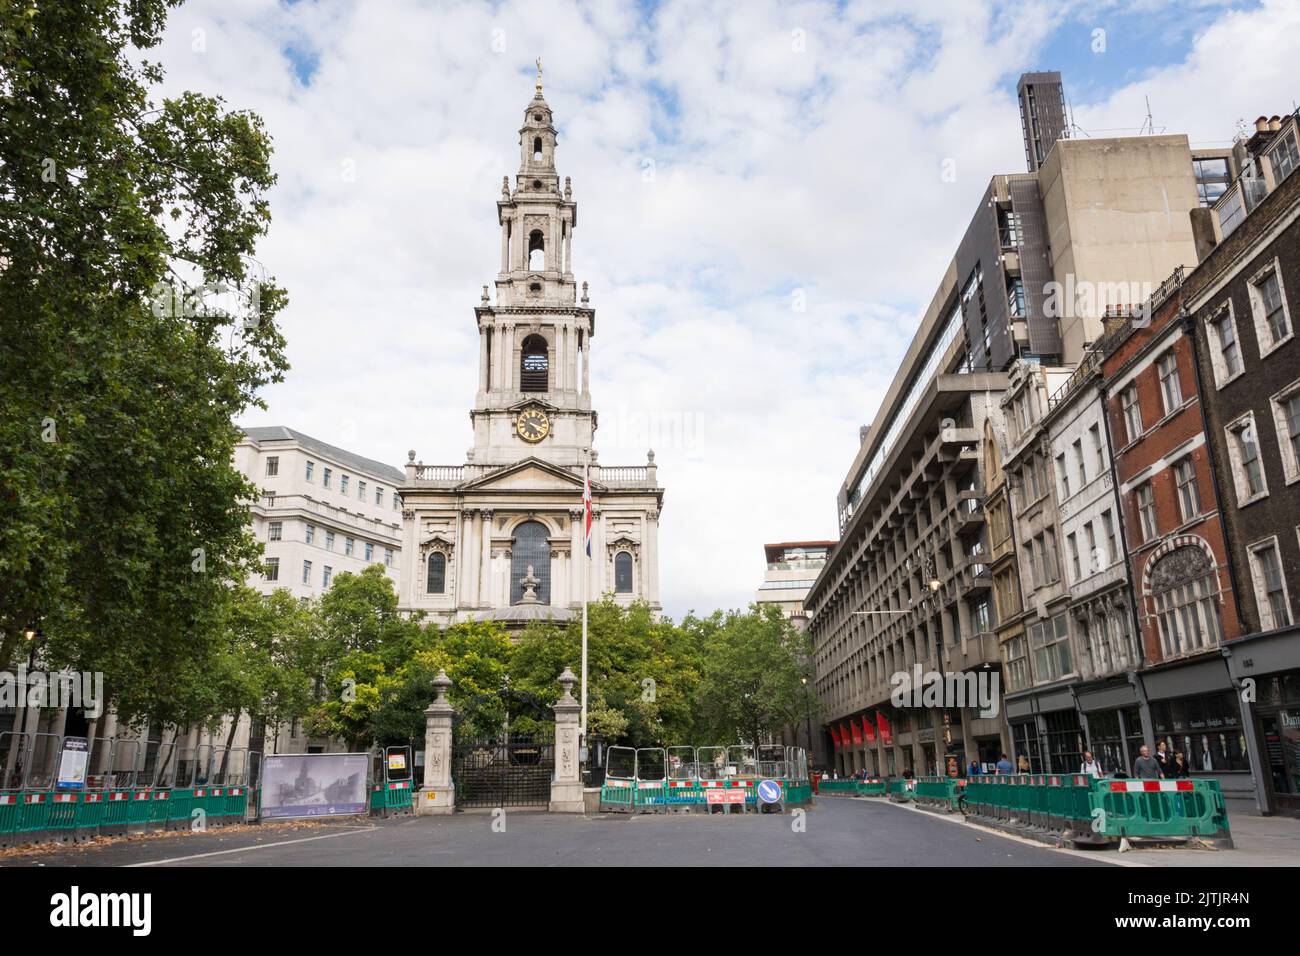 Sir Christopher Wren's St Clement Danes Church and King's College London, Strand, London, England, UK Stock Photo